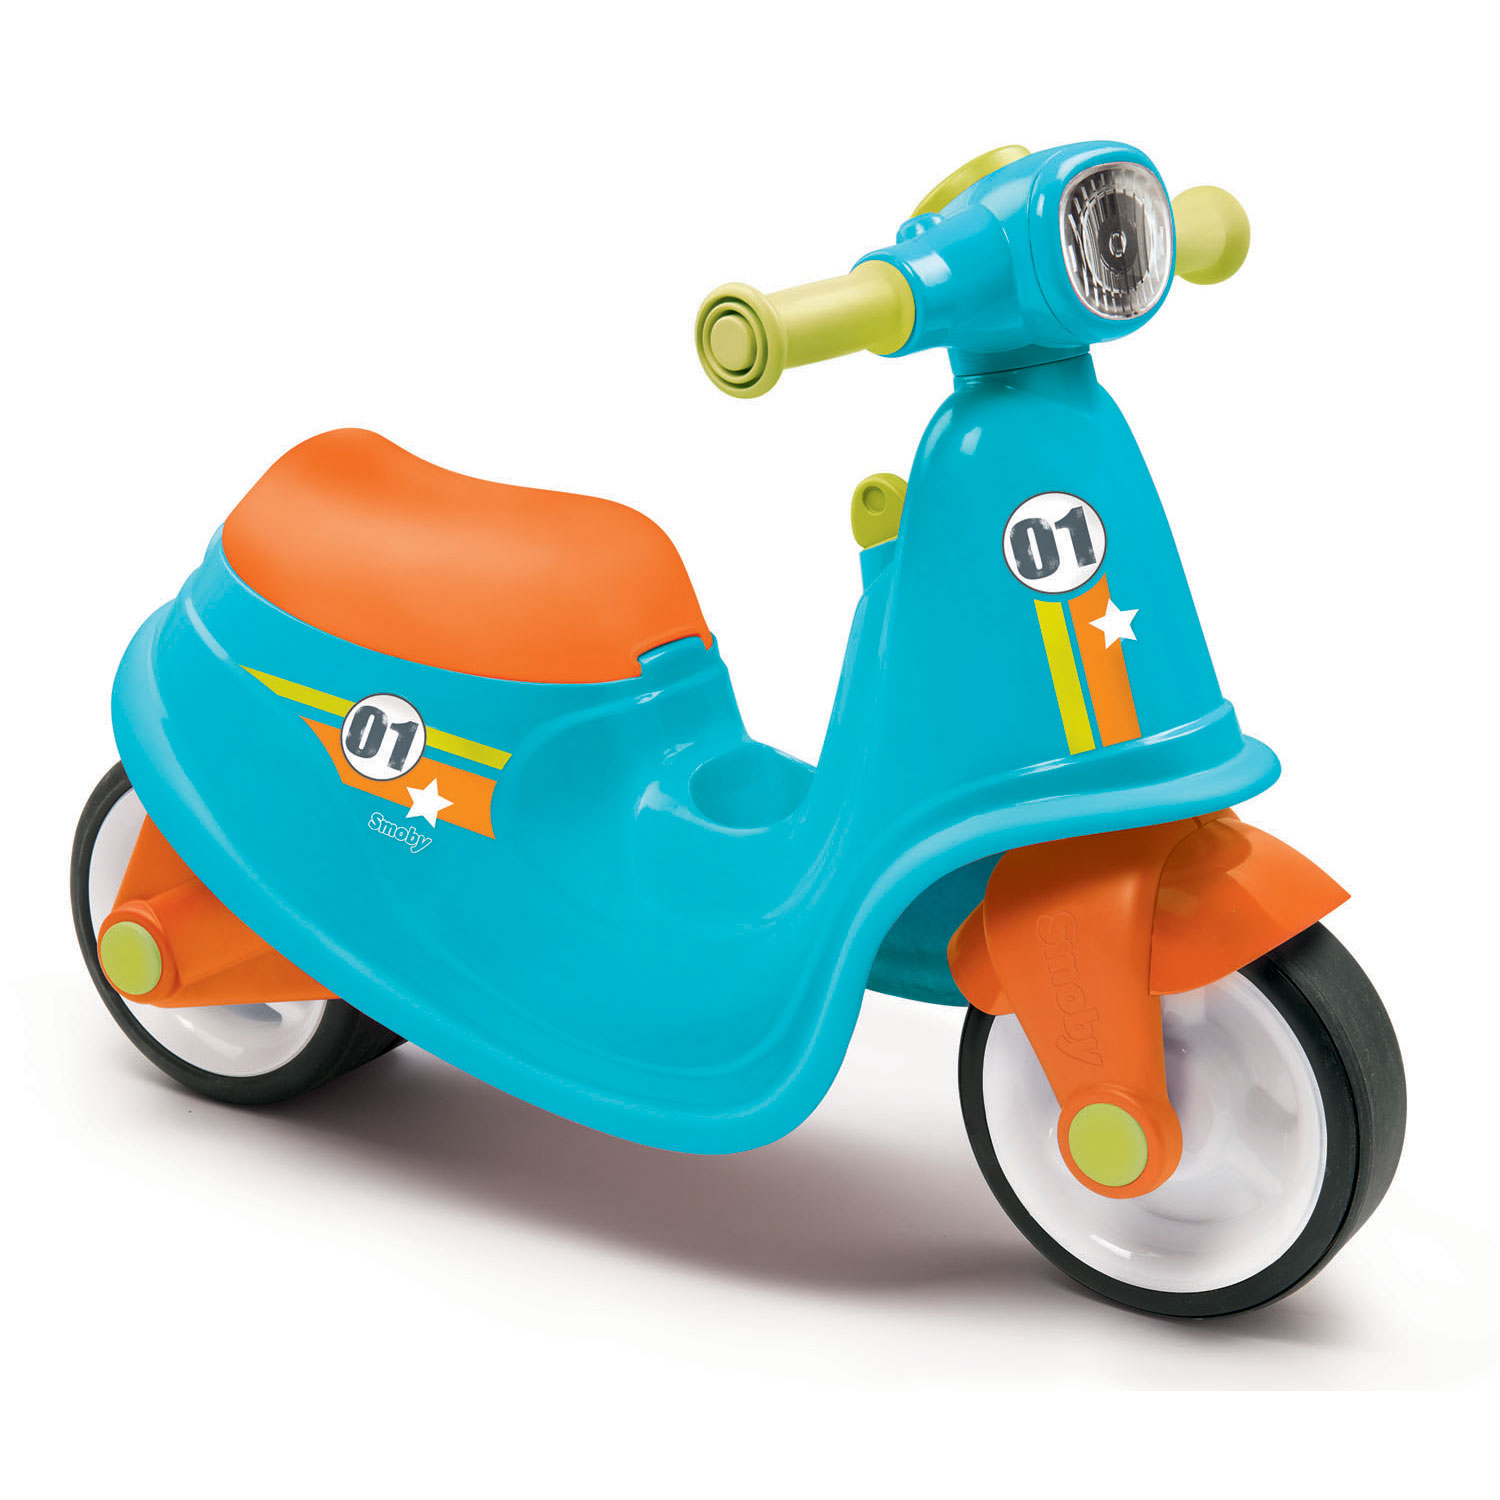 Smoby Scooter Ride On Blauw